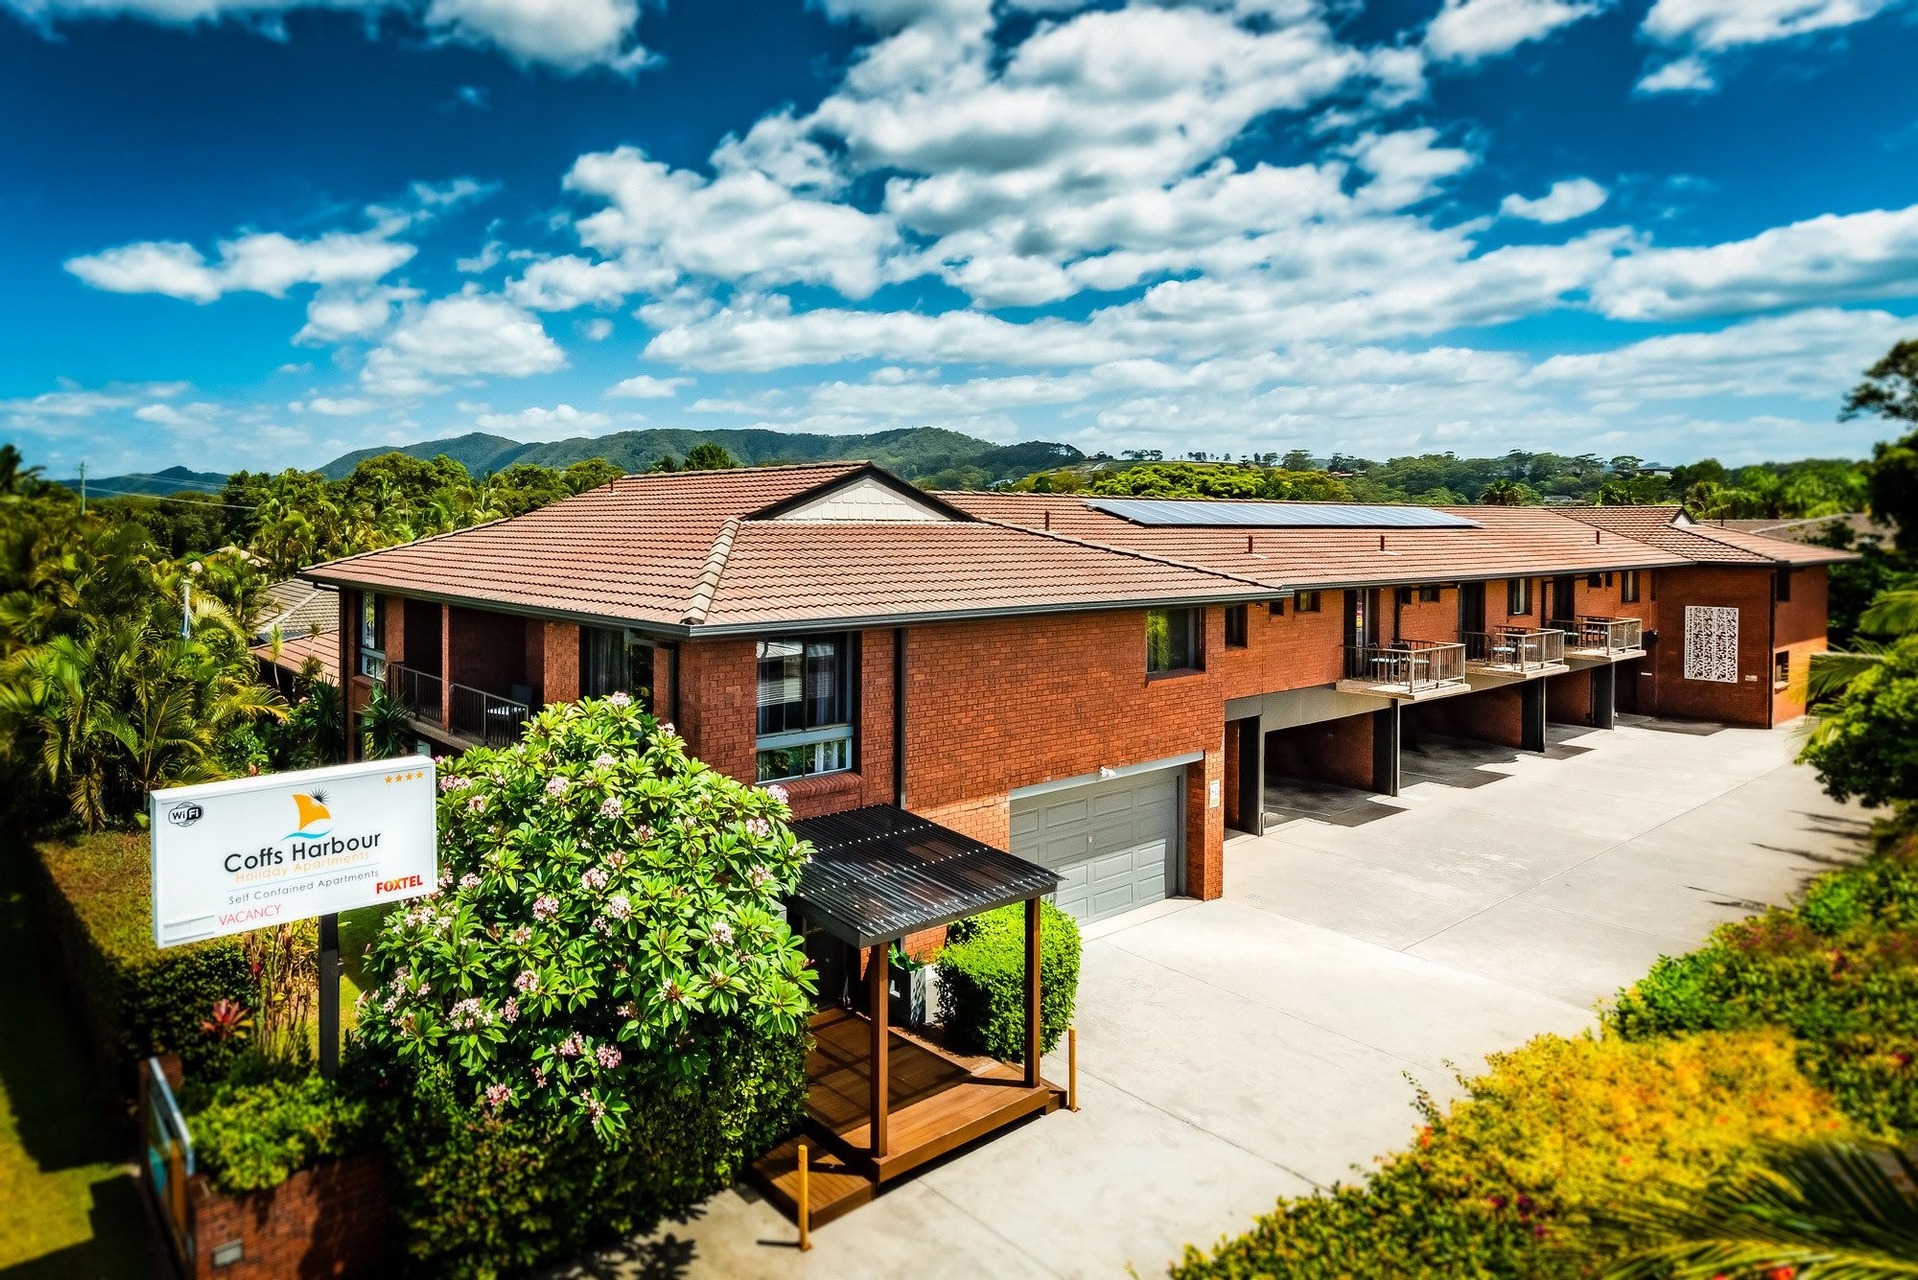 Others, Coffs Harbour Holiday Apartments, Coffs Harbour - Pt A